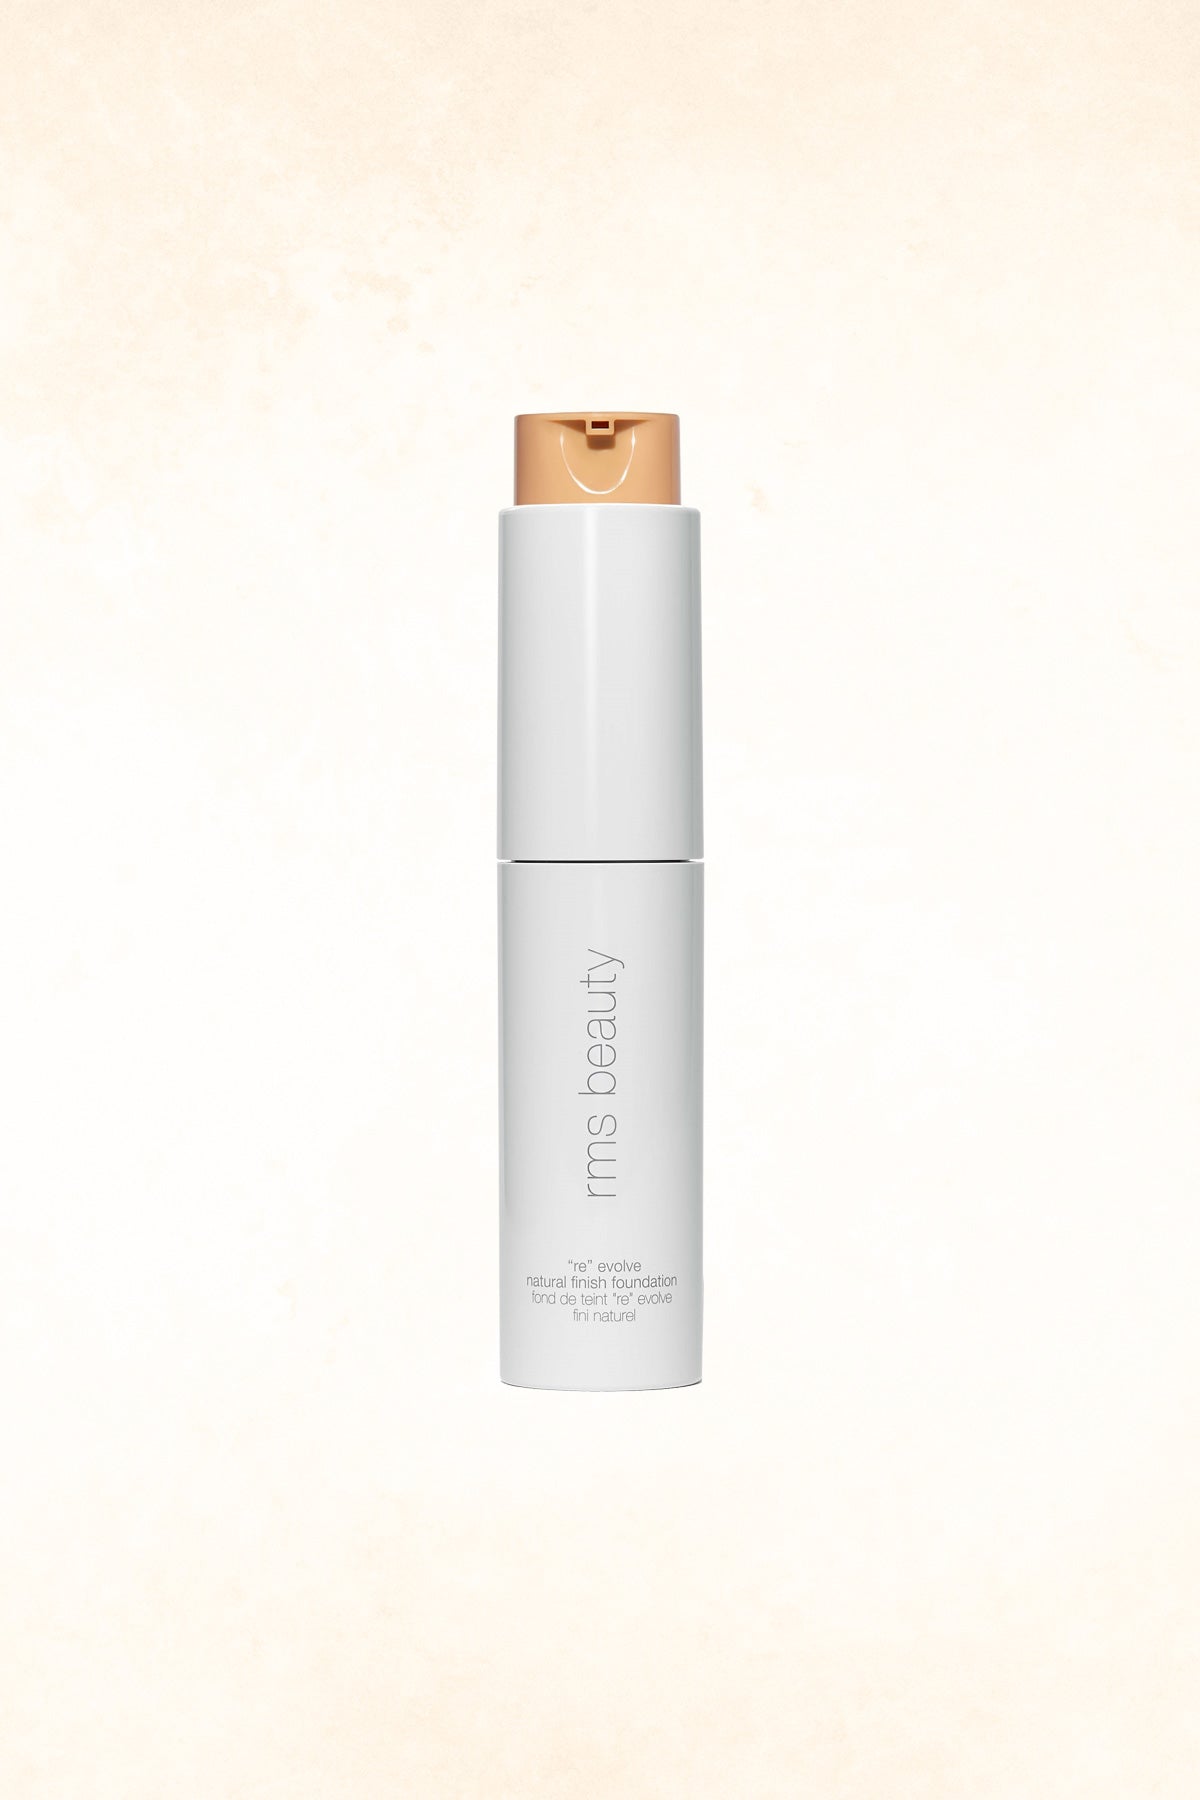 RMS Beauty – &quot;Re&quot; Evolve Natural Finish Foundation - 33